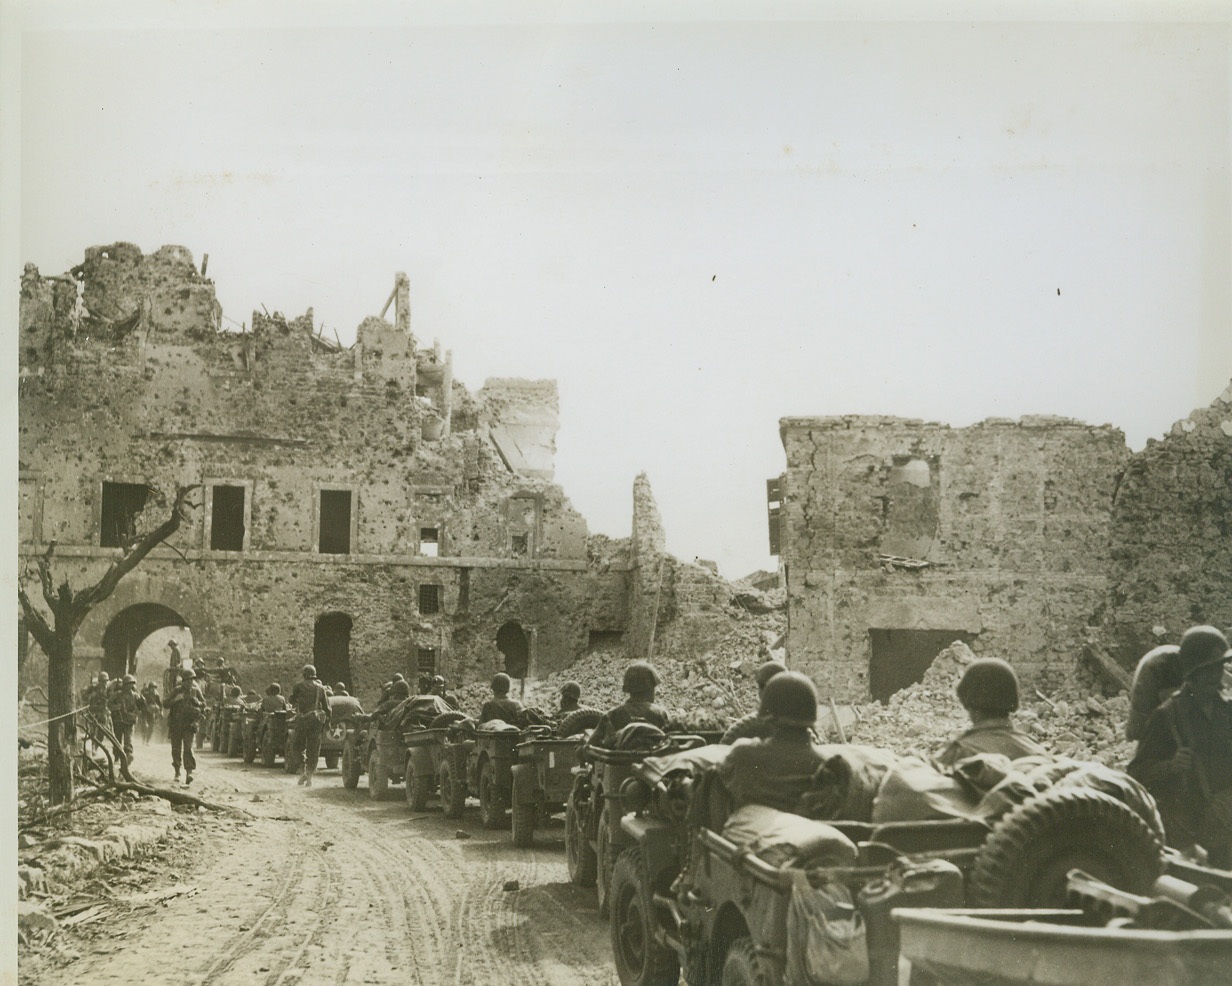 Parade of Jeeps through Cisterna Castle, 6/9/1944. Italy – A long line of Jeeps, American cavalry, winds through the ruins of what was once a proud castle in Cisterna, Italy. Troops are in pursuit of the Germans who had used the castle for a fortress. This town was taken by Anzio forces of the Allied Fifth Army in the early stages of the drive on Rome. Credit-WP-(ACME);